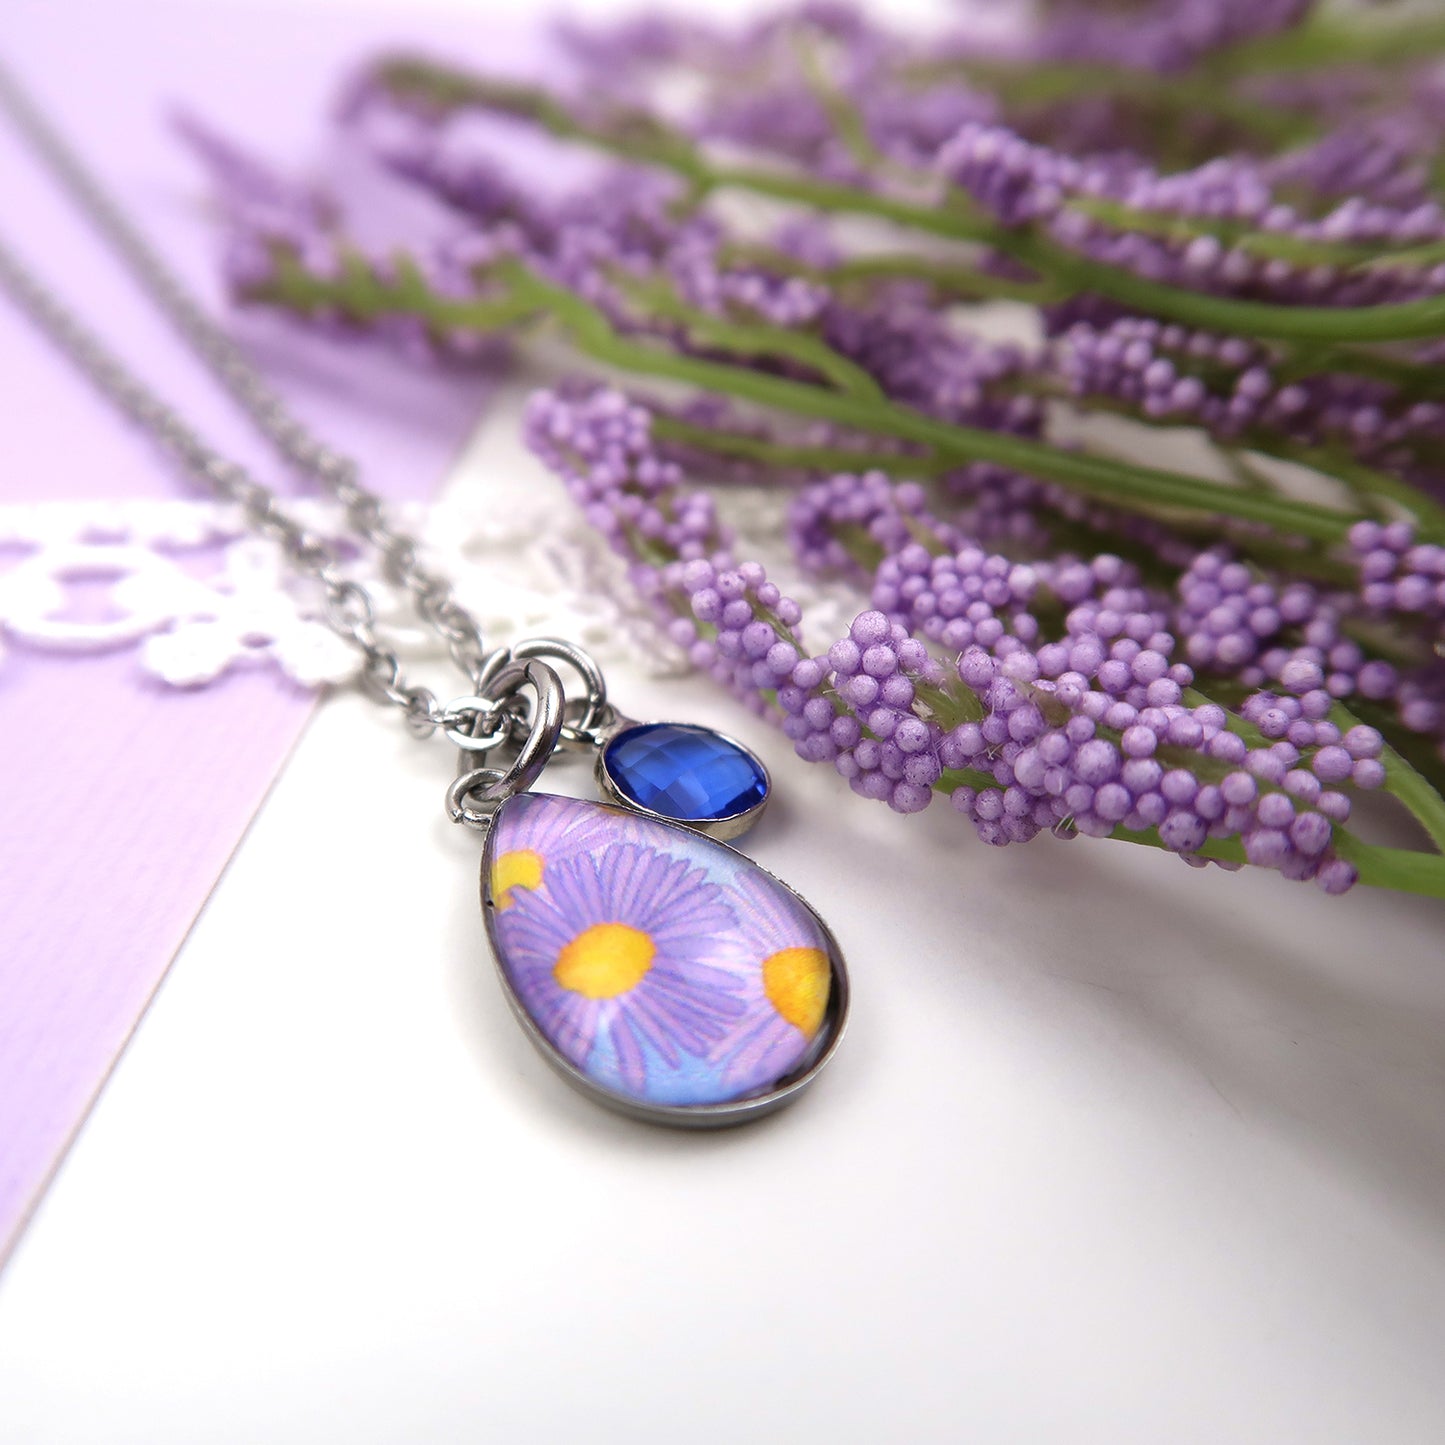 September Birth Flower Necklace - Asters